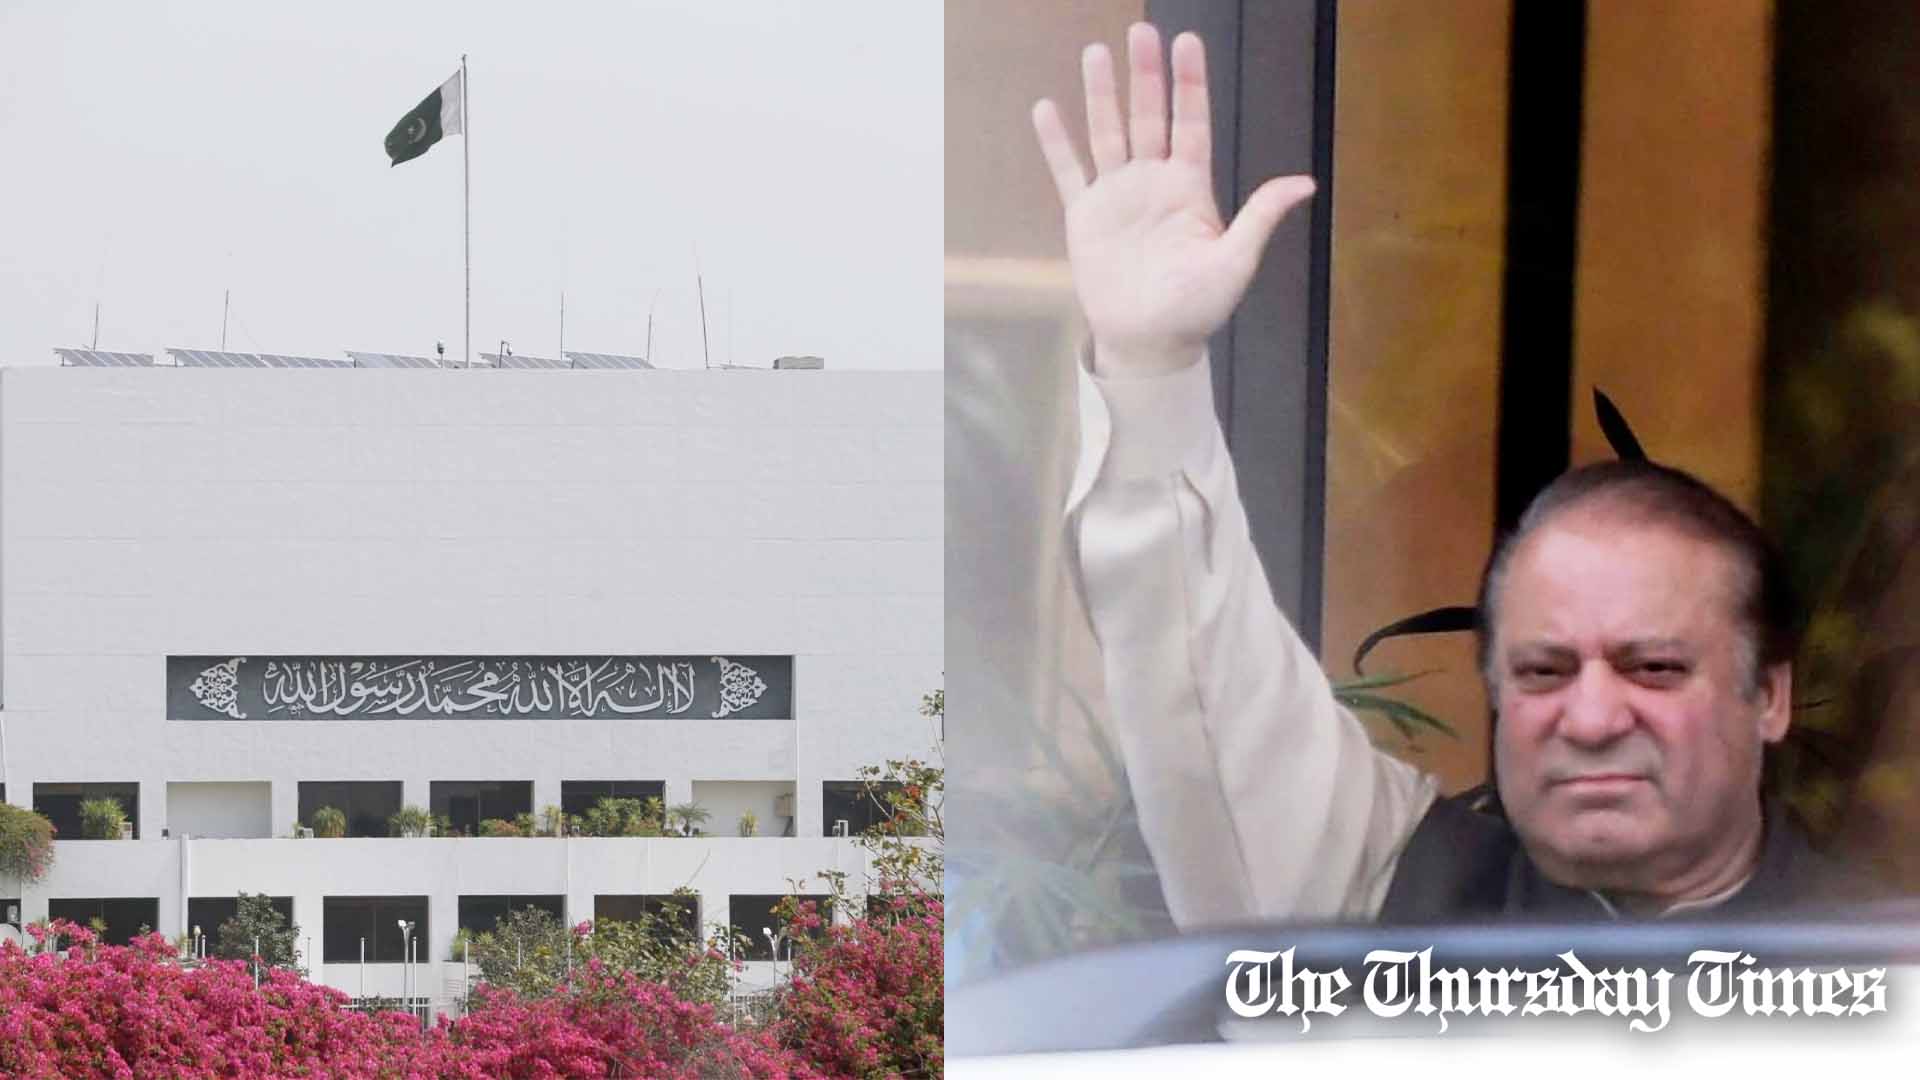 A combined file photo is shown of the National Assembly of Pakistan building at Islamabad (L) and PML(N) chief Nawaz Sharif (R). — FILE/THE THURSDAY TIMES